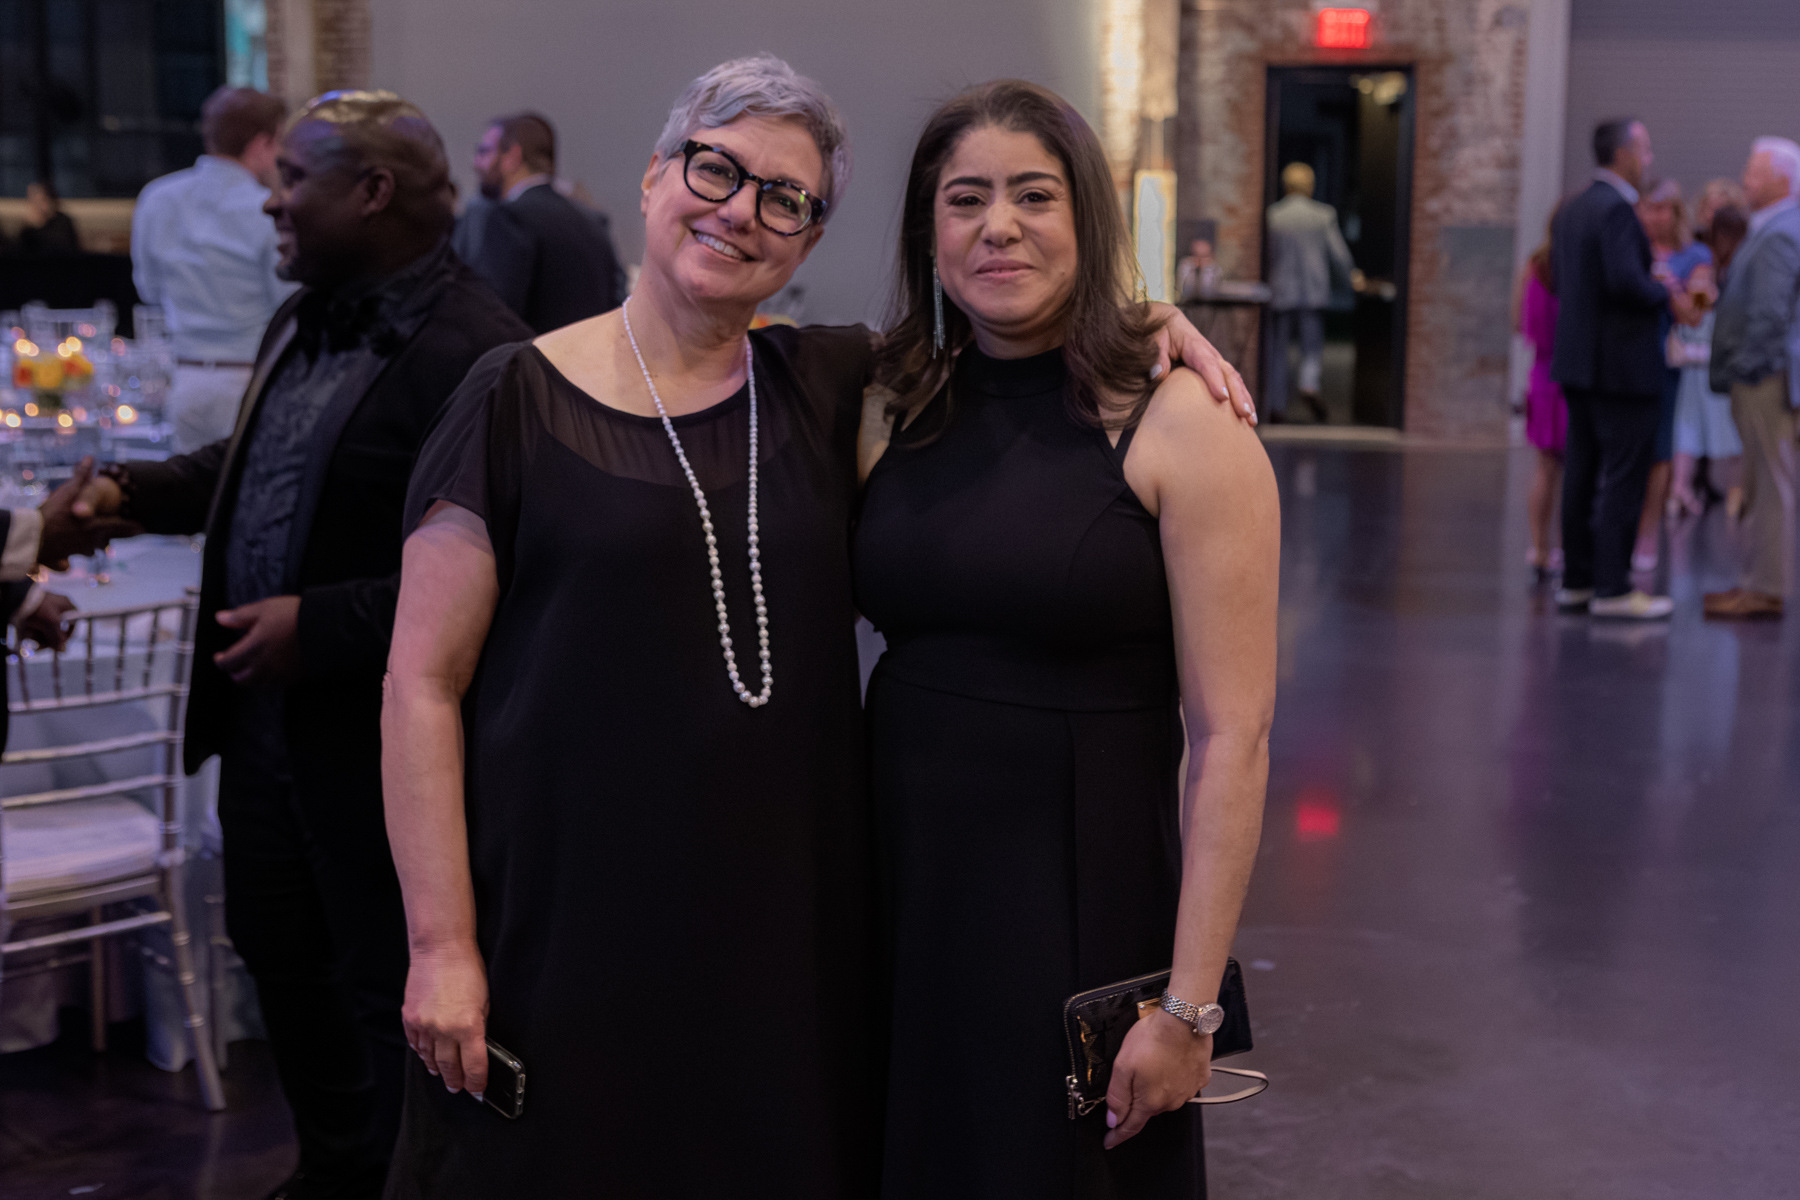 Two women in black dresses smiling in an event venue